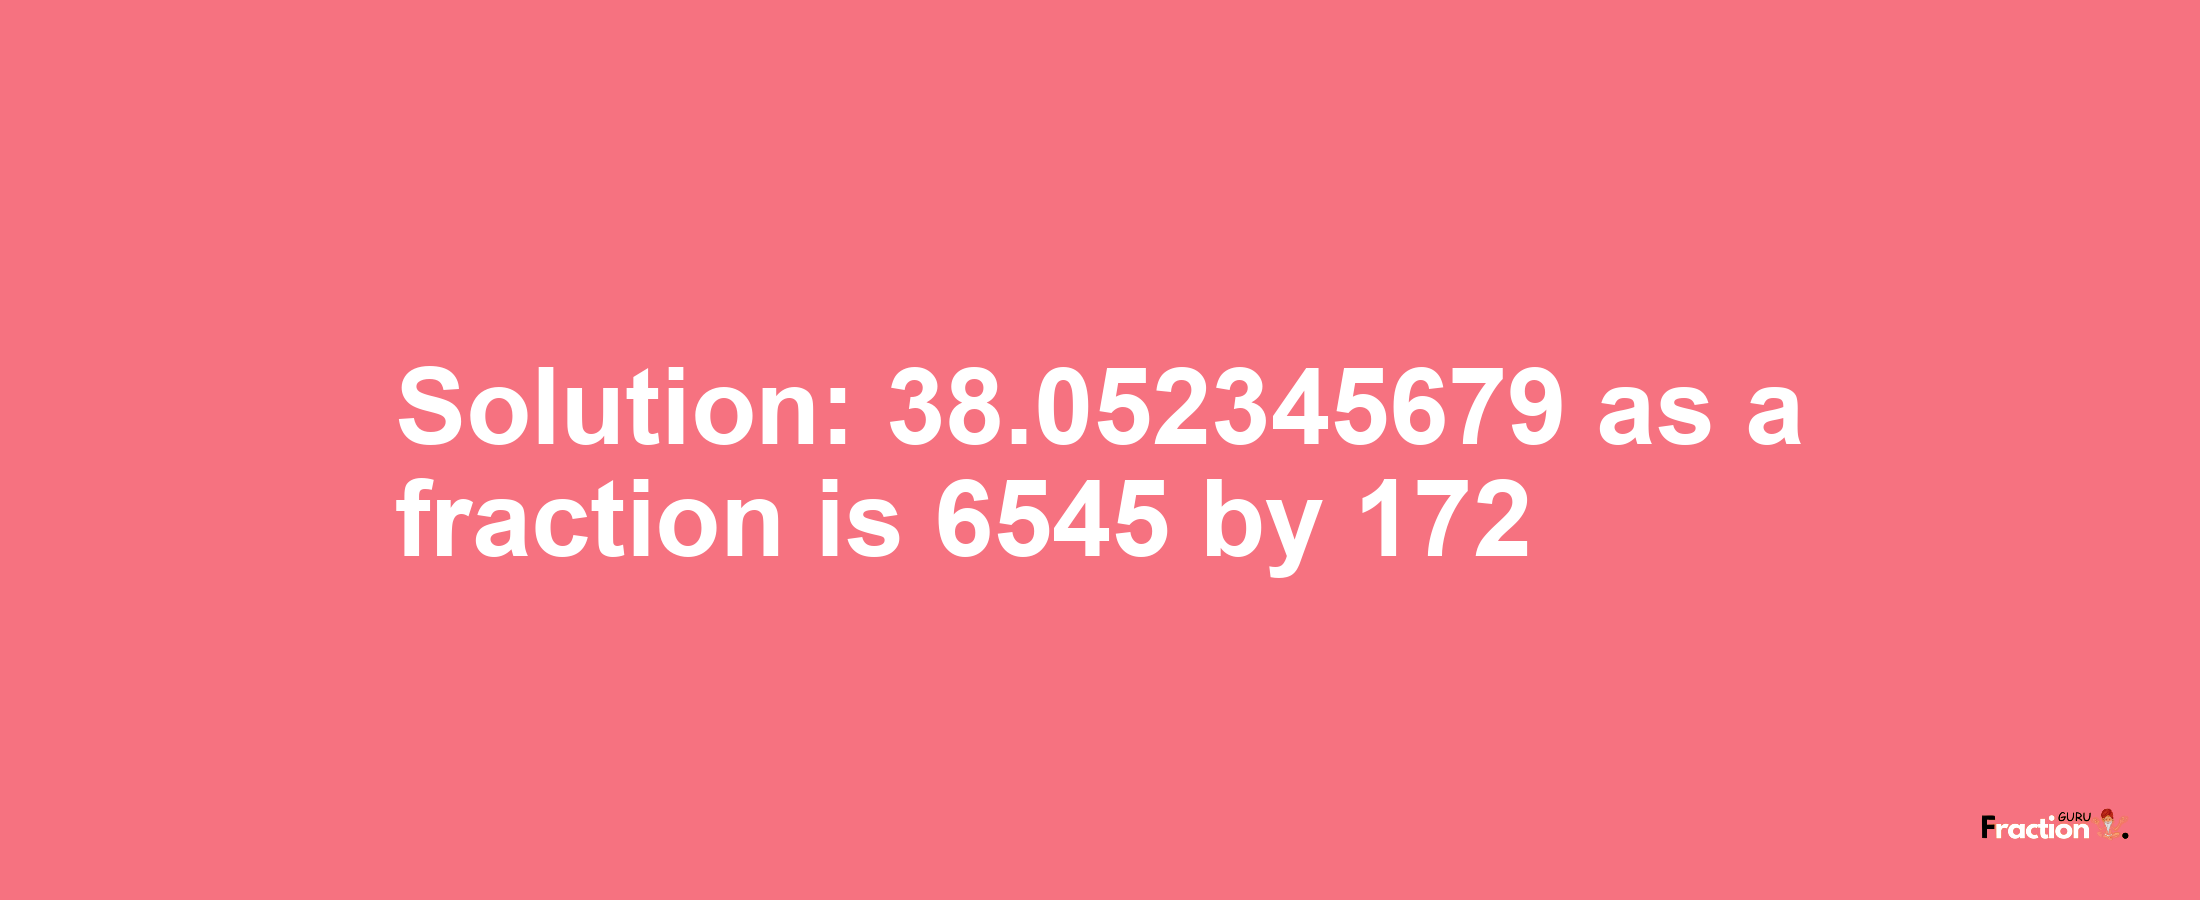 Solution:38.052345679 as a fraction is 6545/172